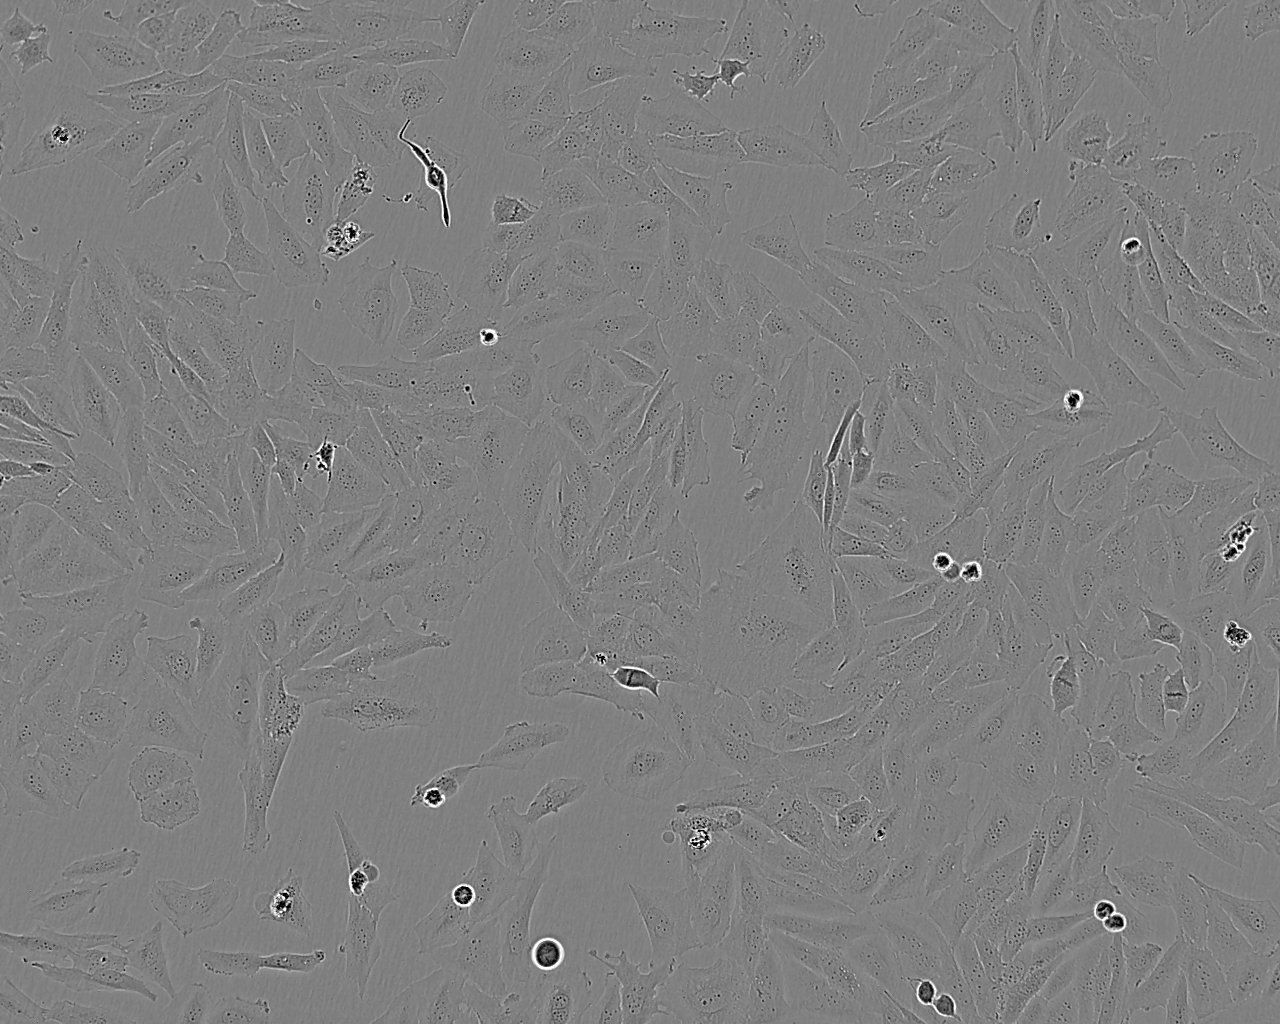 RERF-LC-MS epithelioid cells人肺癌腺癌细胞系